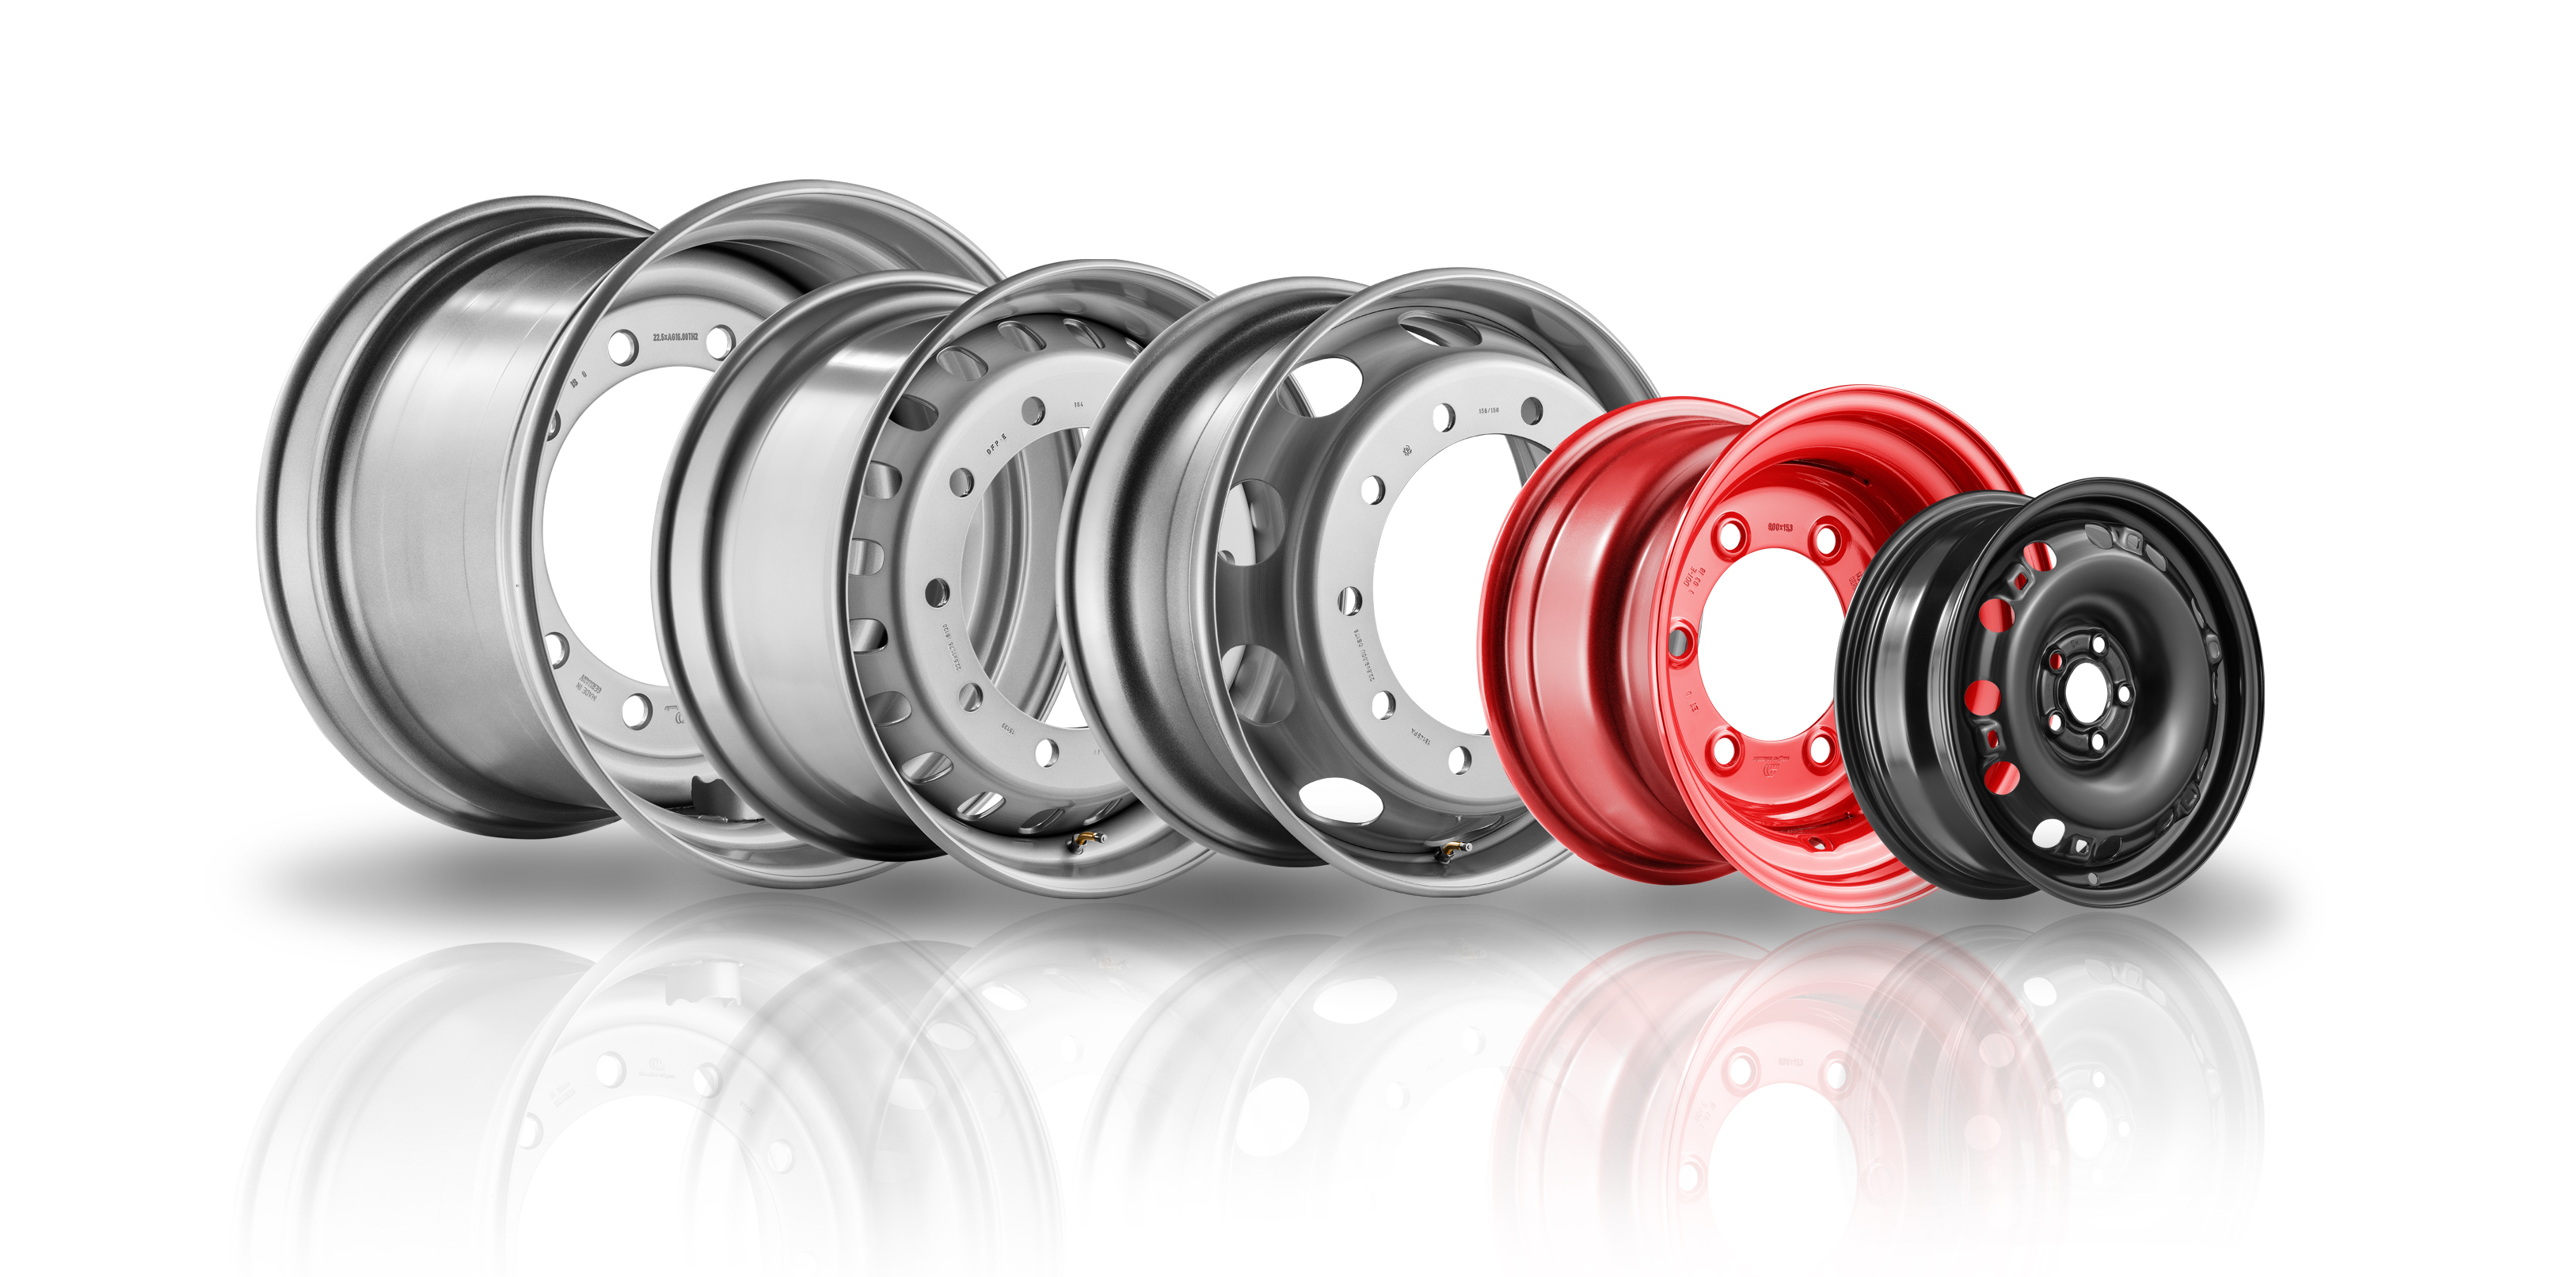 Accuride Corporation Expands Global Presence with Acquisition of Mefro Wheels GmbH